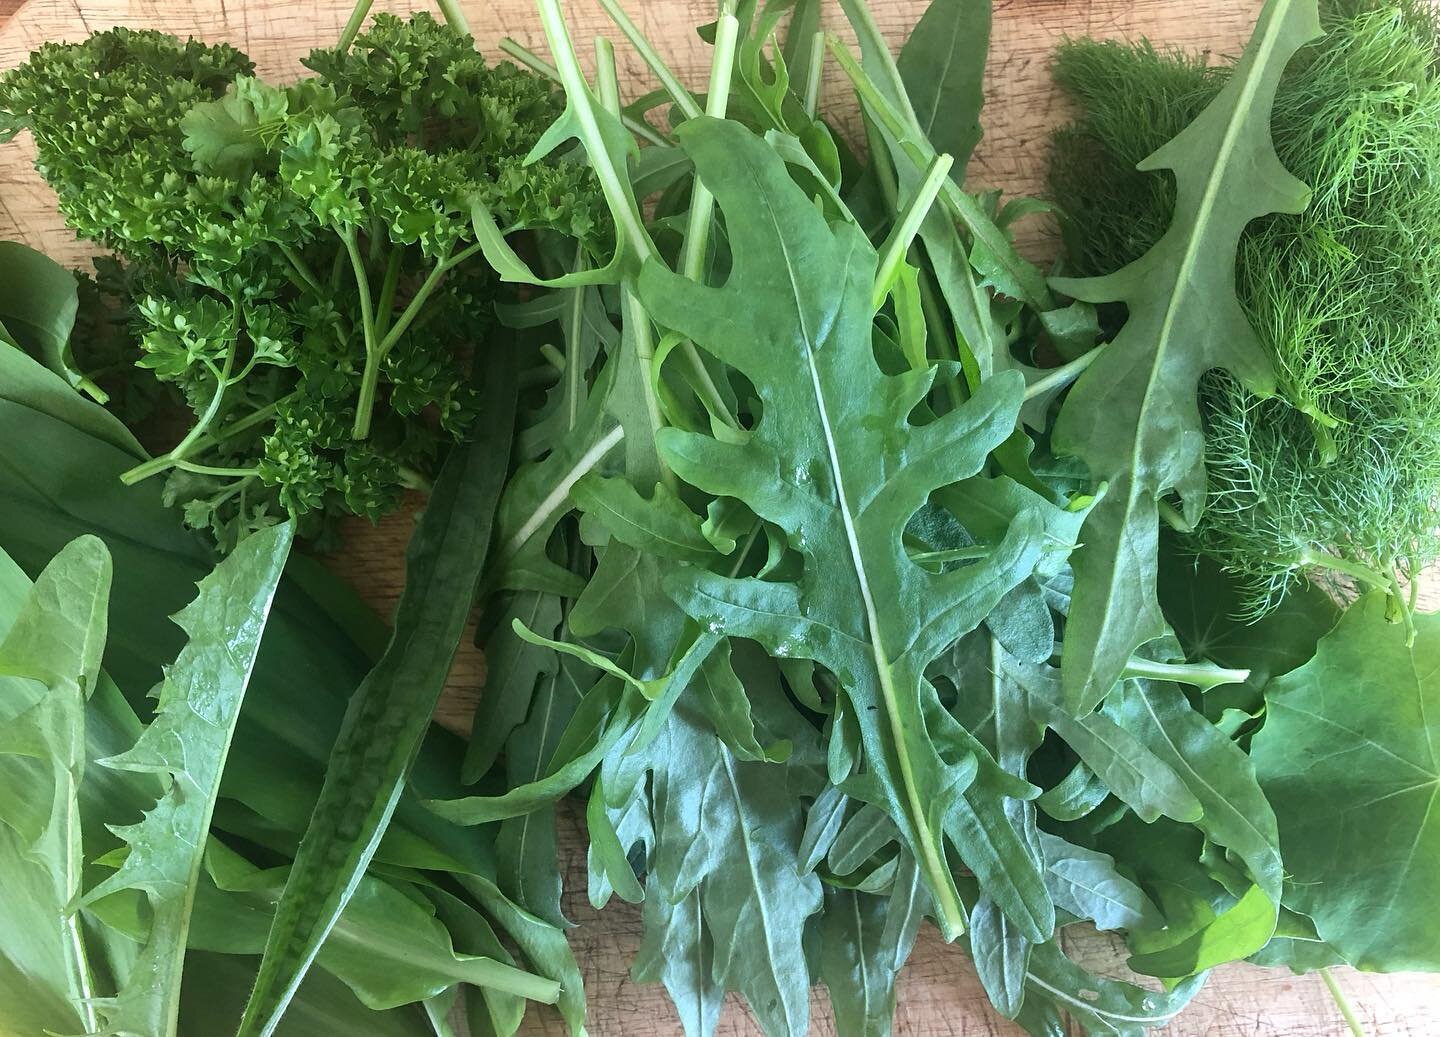 First day of the London Permaculture Design Course is tomorrow. I&rsquo;m getting ready for the abundant pot luck lunches by making a half wild half home grown pesto filled willed with spring energy. Nettles (first turned into tea) and rocket are the